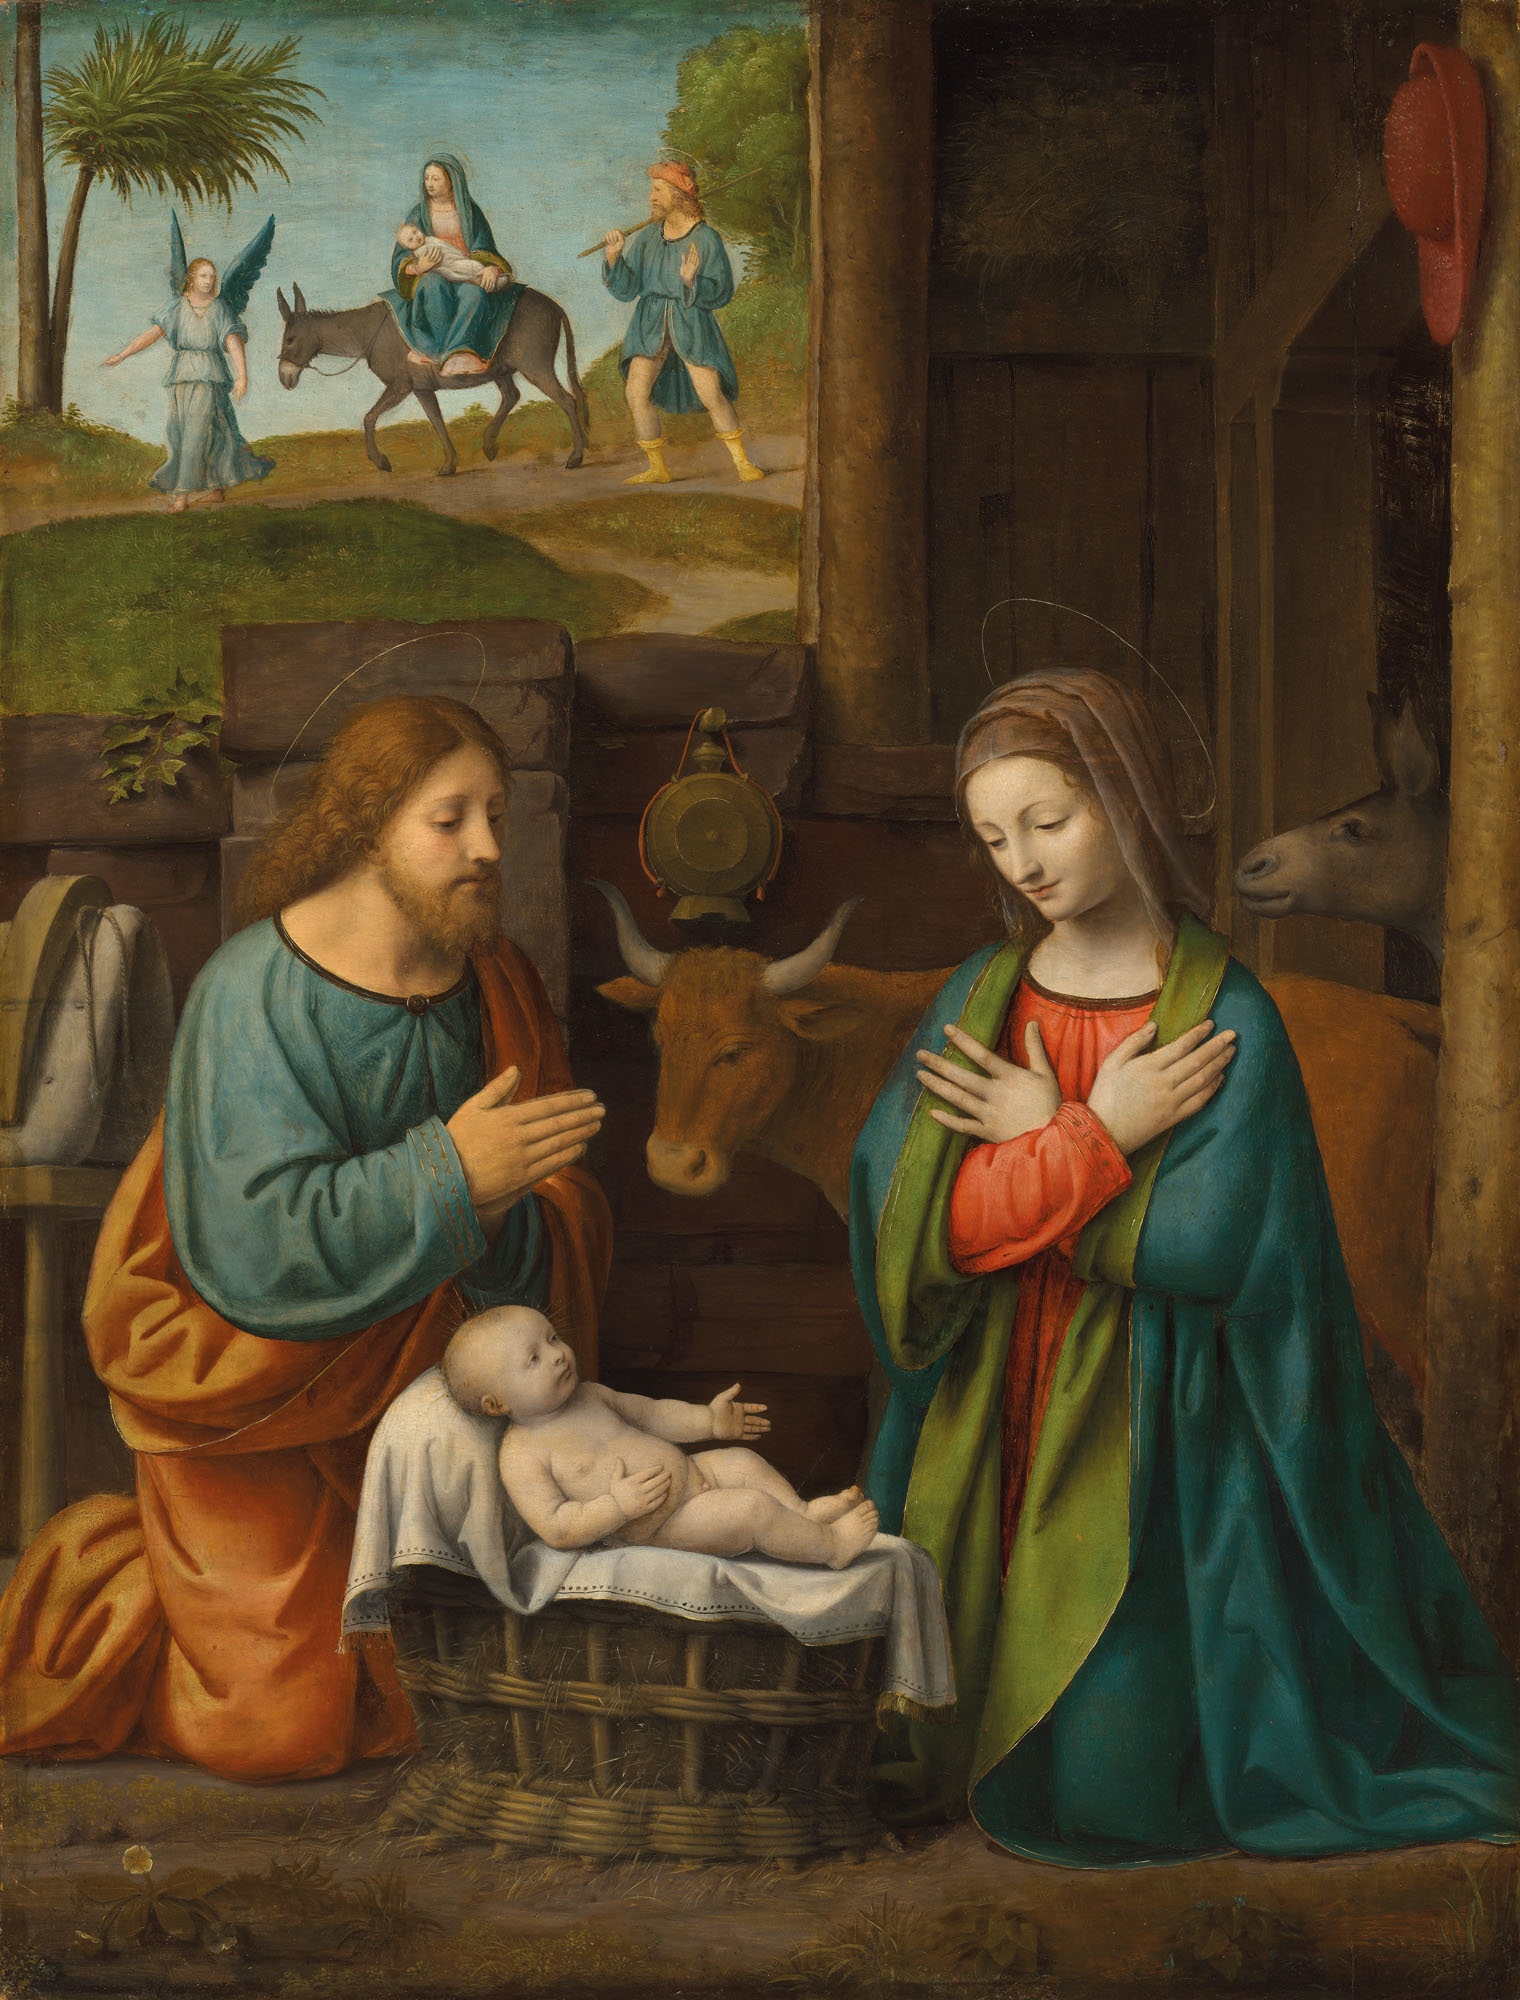 Artwork by Bernardino Luini, The Nativity, with the Journey to Egypt beyond, Made of tempera and oil on panel